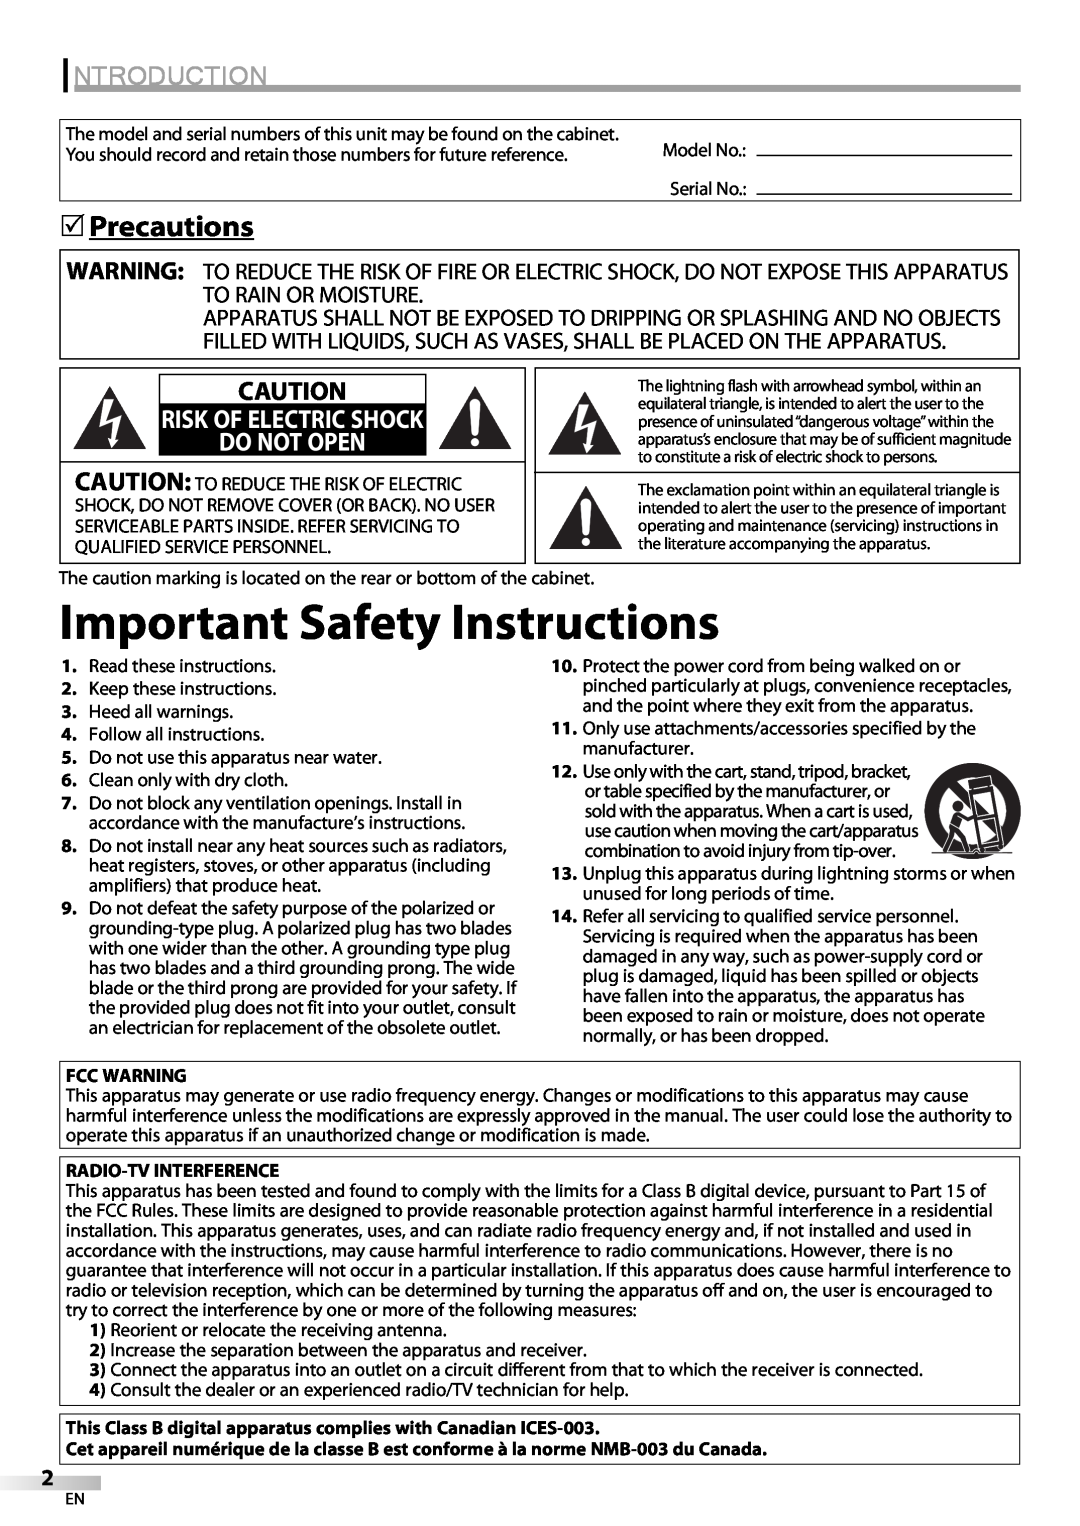 Emerson LC420EM8 owner manual Important Safety Instructions, Introduction, Precautions, Do Not Open, Risk Of Electric Shock 